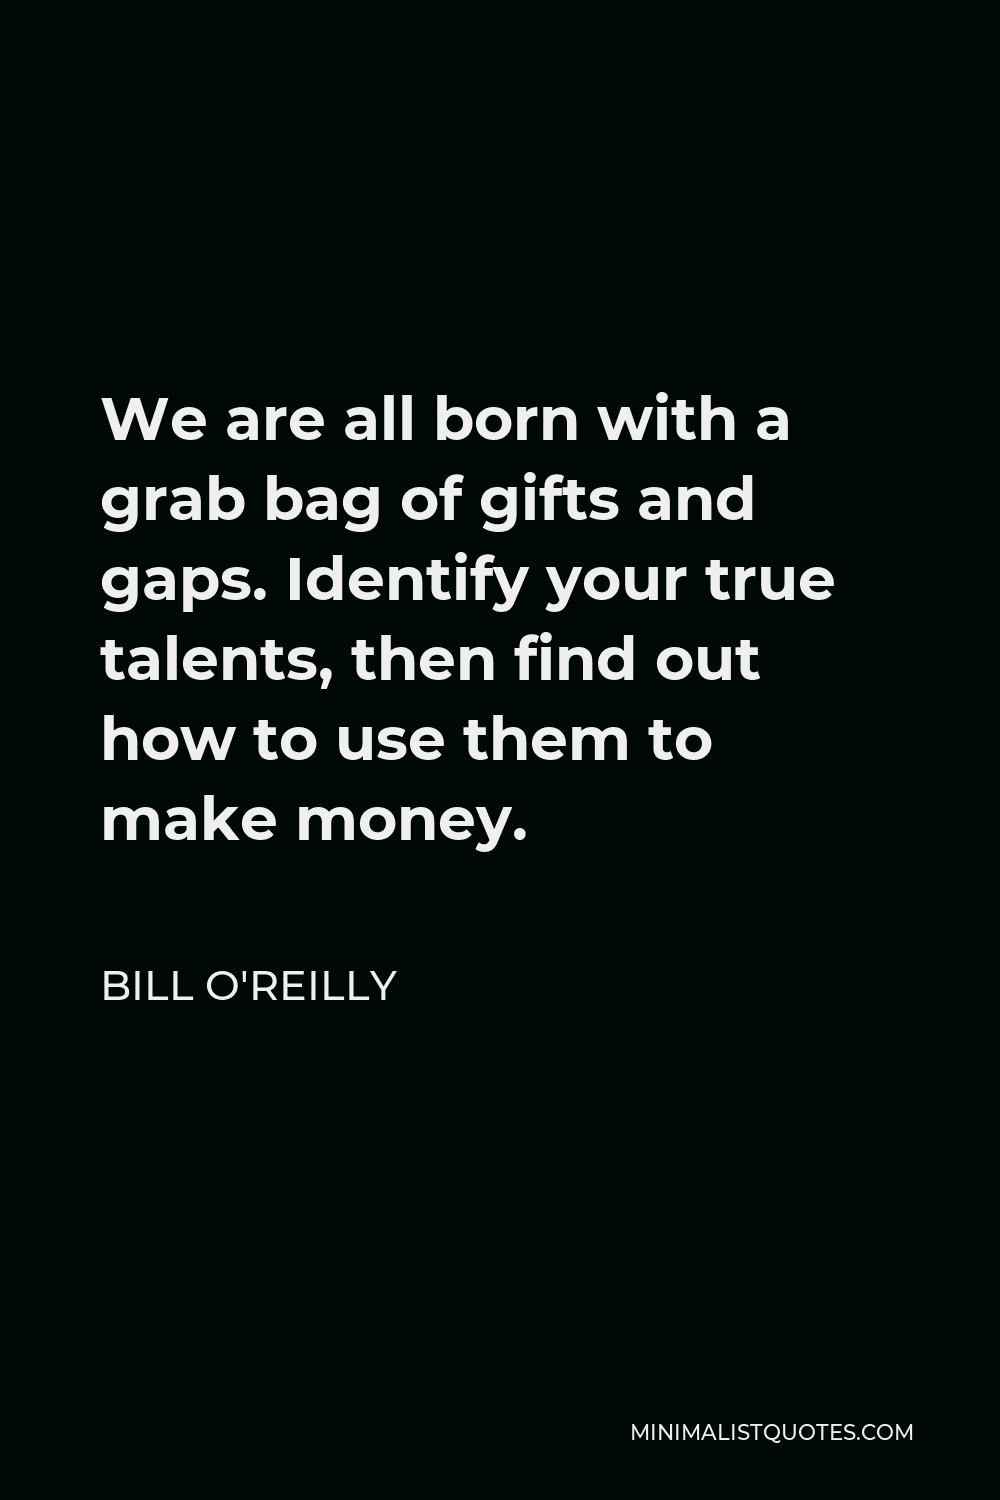 Bill O'Reilly Quote - We are all born with a grab bag of gifts and gaps. Identify your true talents, then find out how to use them to make money.